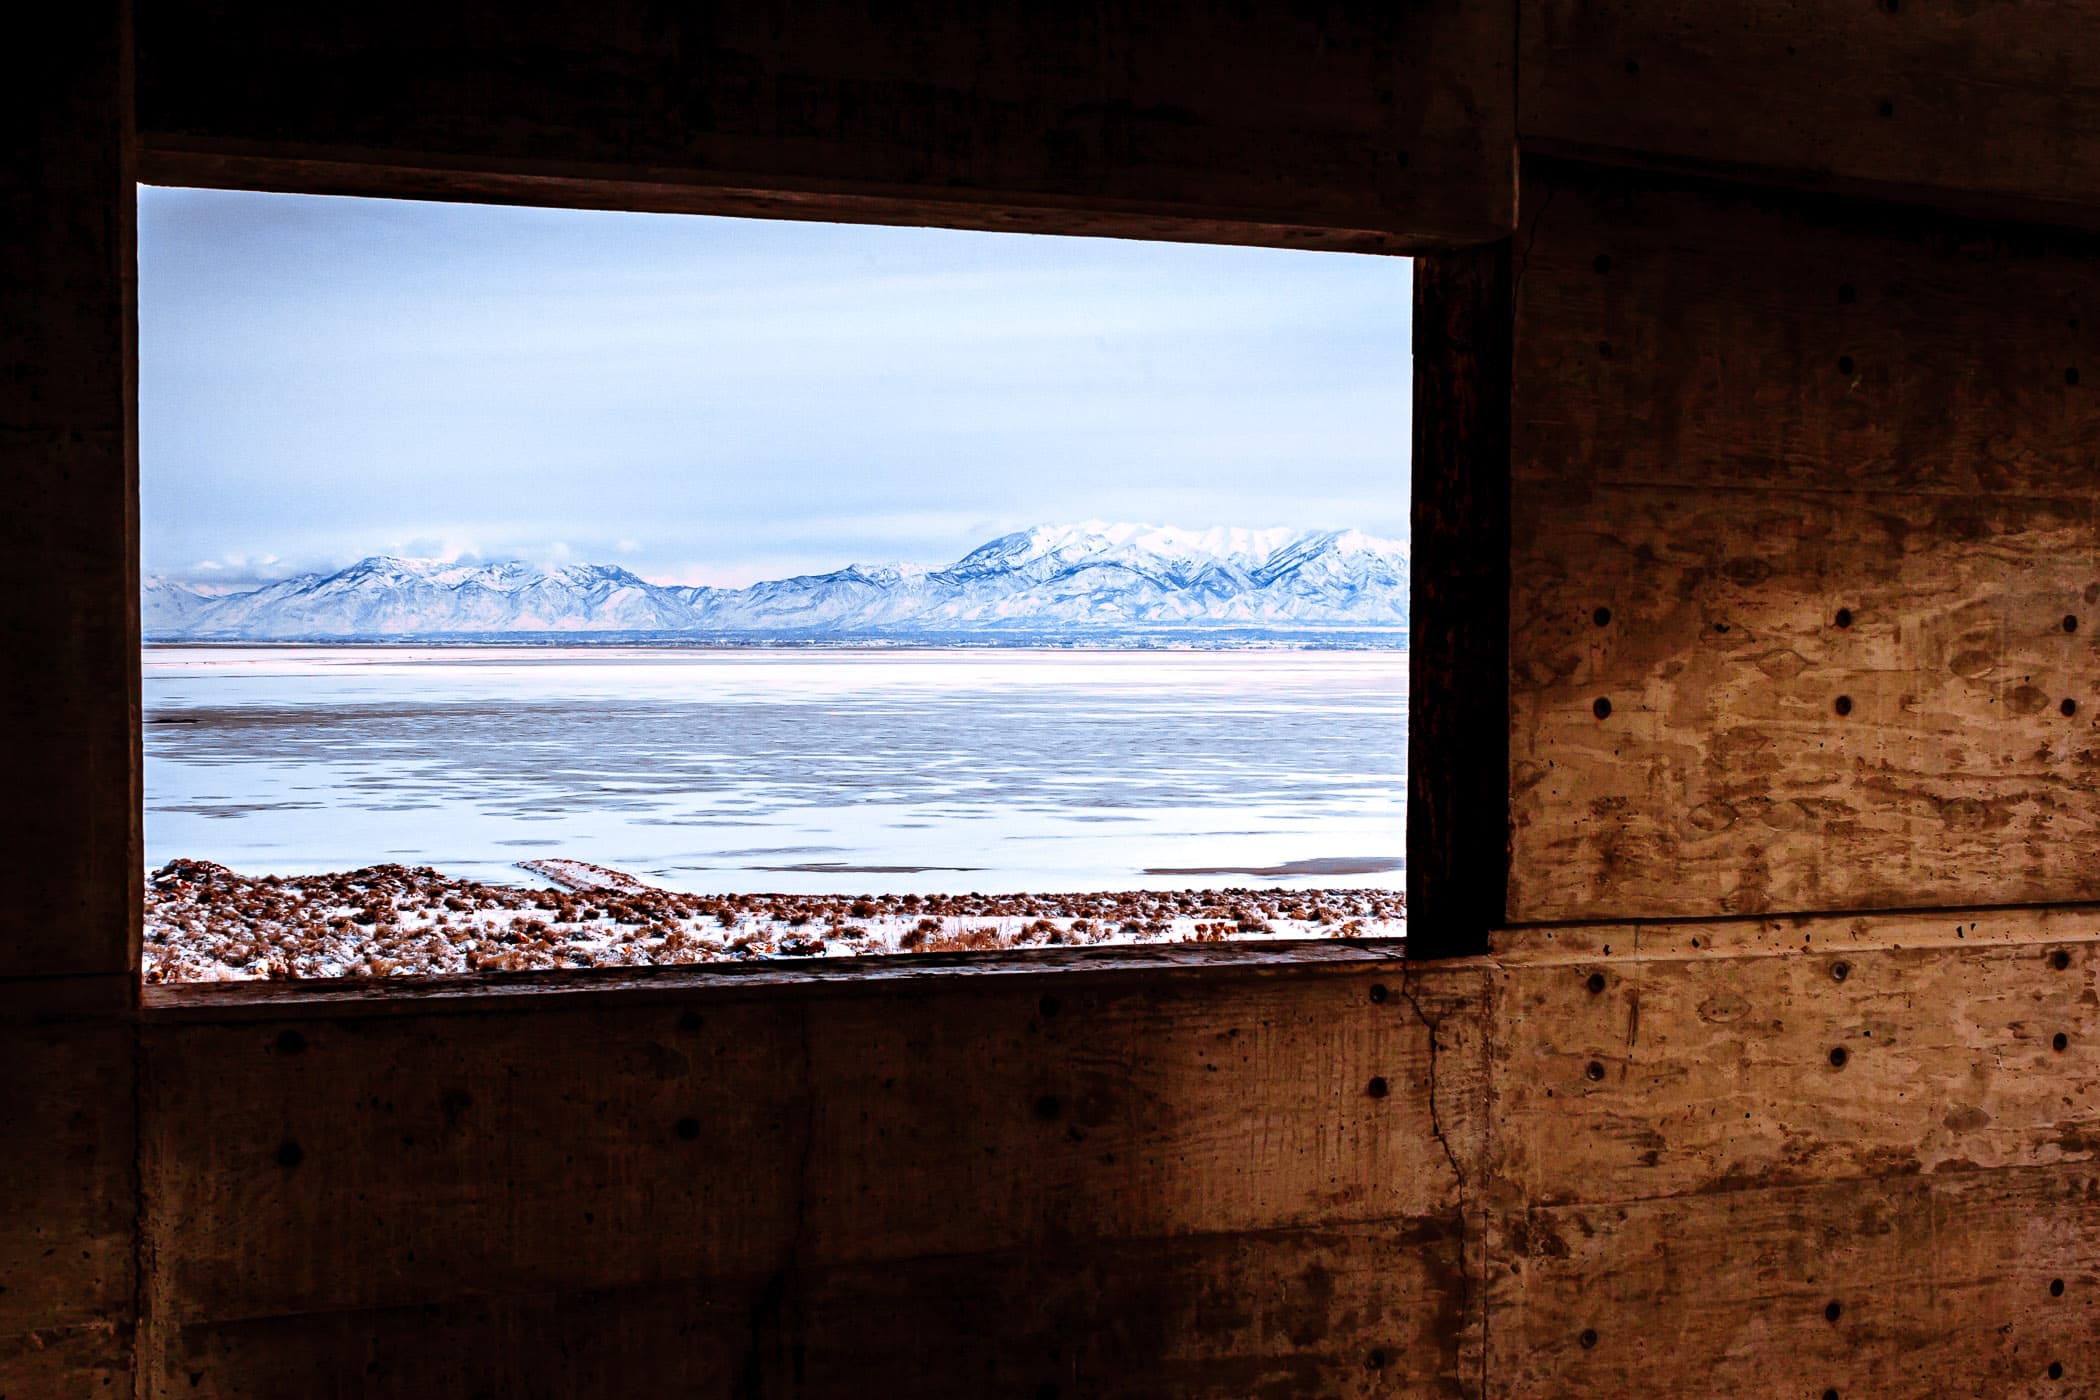 The Wasatch Front as seen through a window at the Antelope Island State Park Visitors Center, Utah.